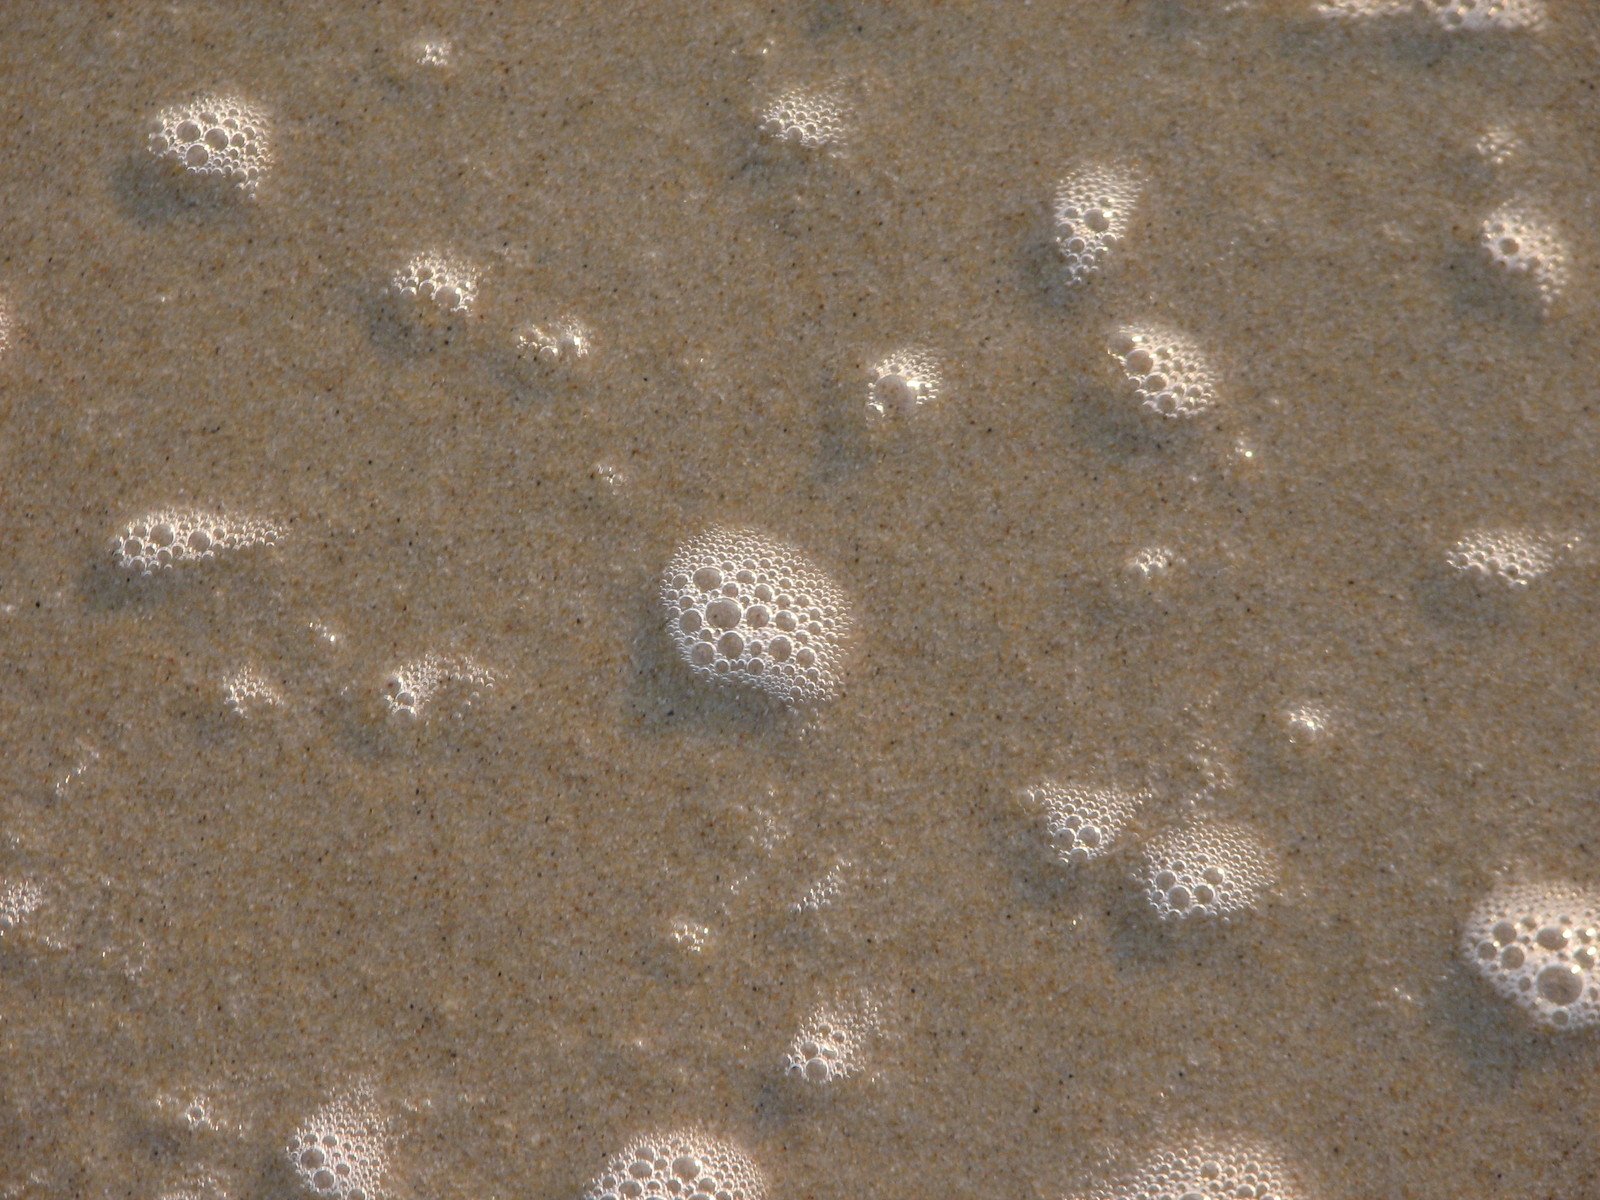 the view of some small bubbles in the sand